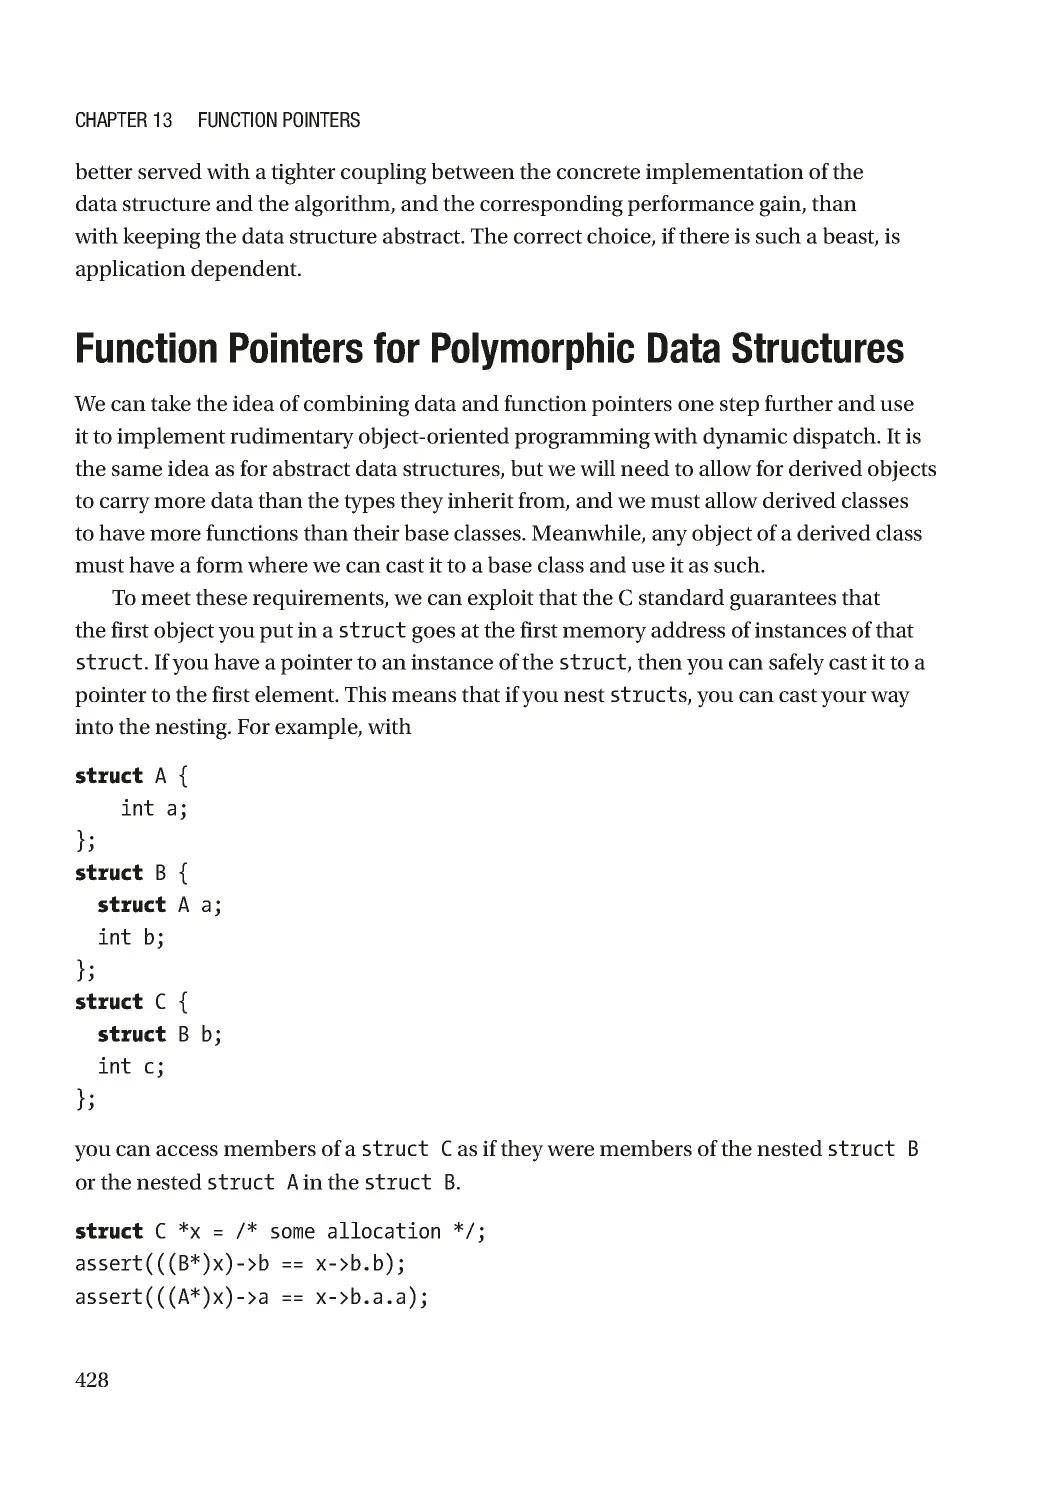 Function Pointers for Polymorphic Data Structures